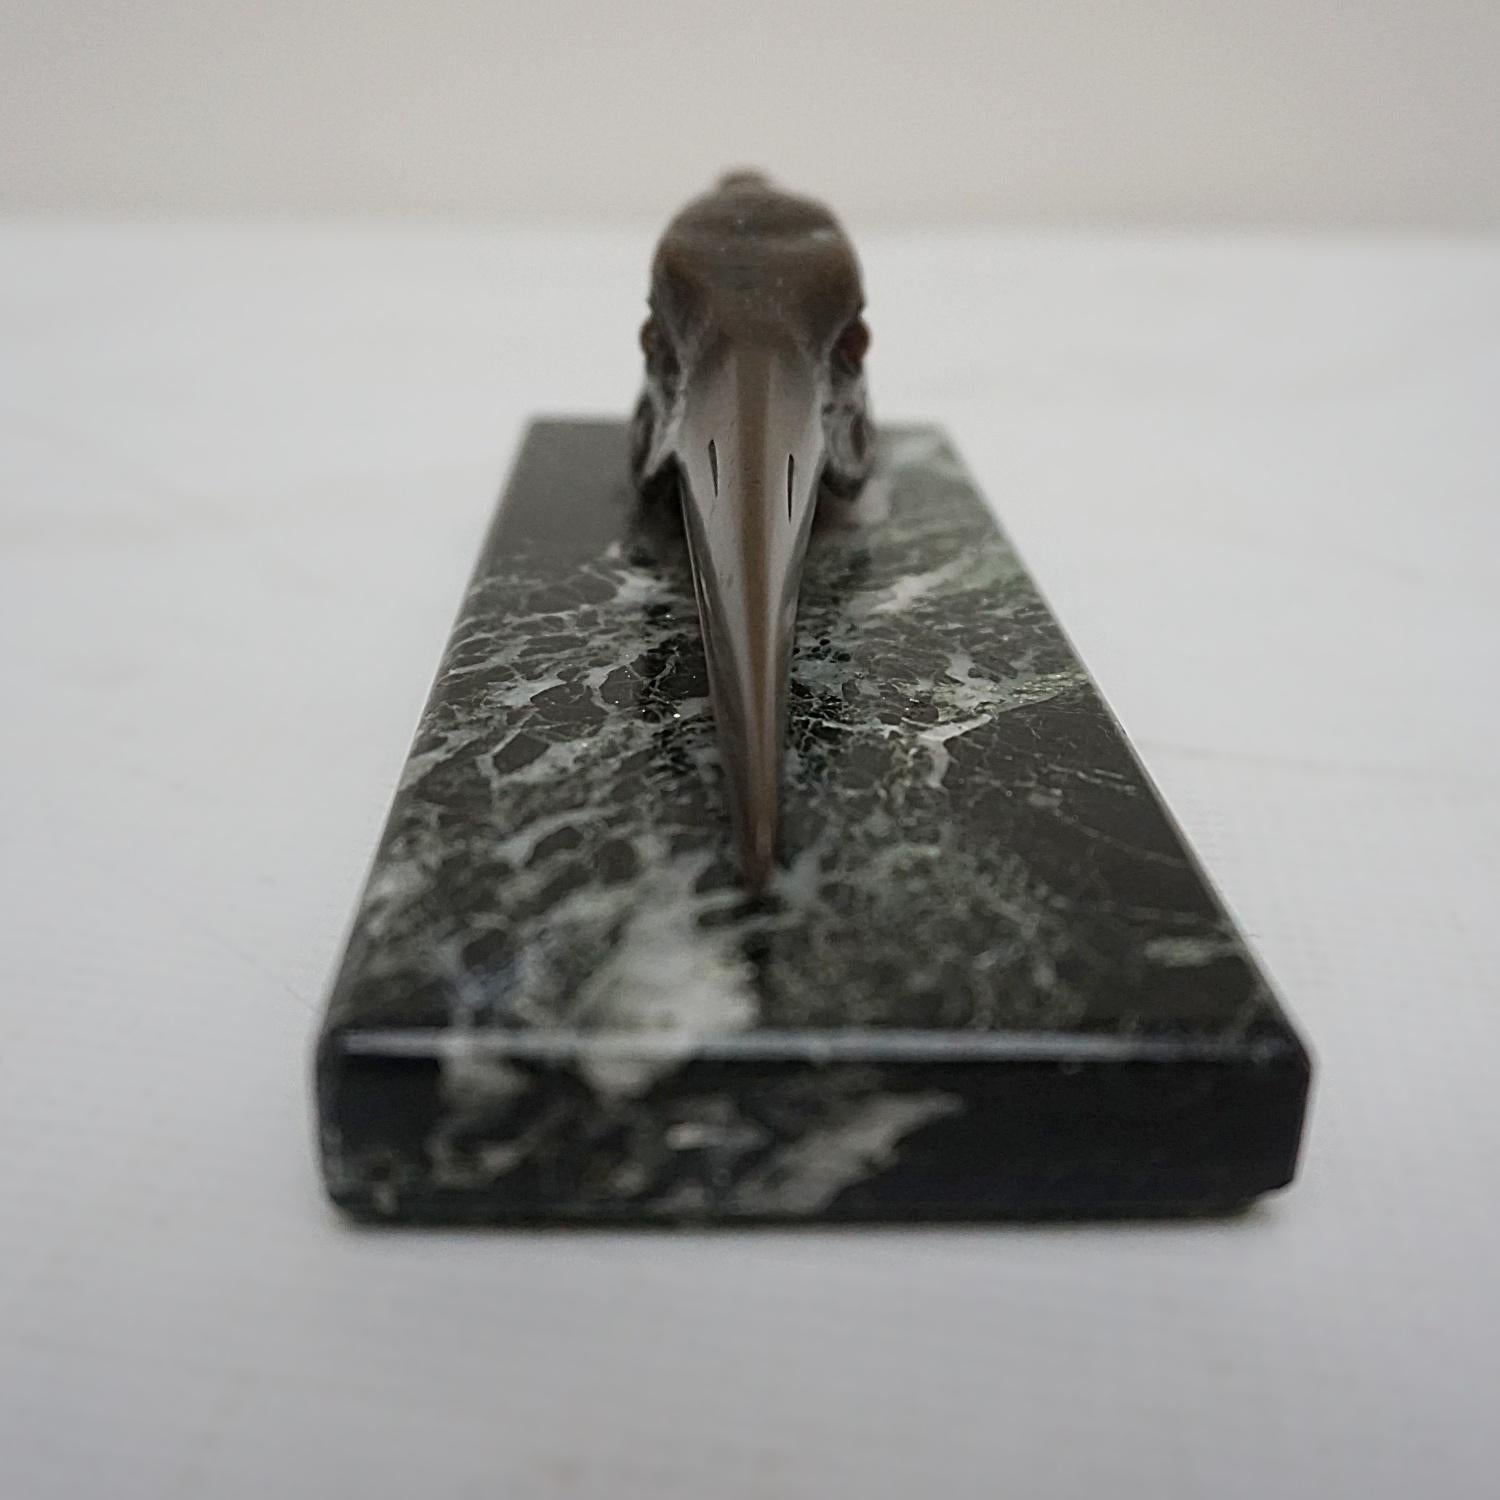 An Art Deco letter holder with a bronze stork head over a marble base. The beak opening to act as a letter holder. 

Dimensions: H 5.5cm W 14cm D 6cm

Origin: English

Date: Circa 1930

Item Number: 0811223